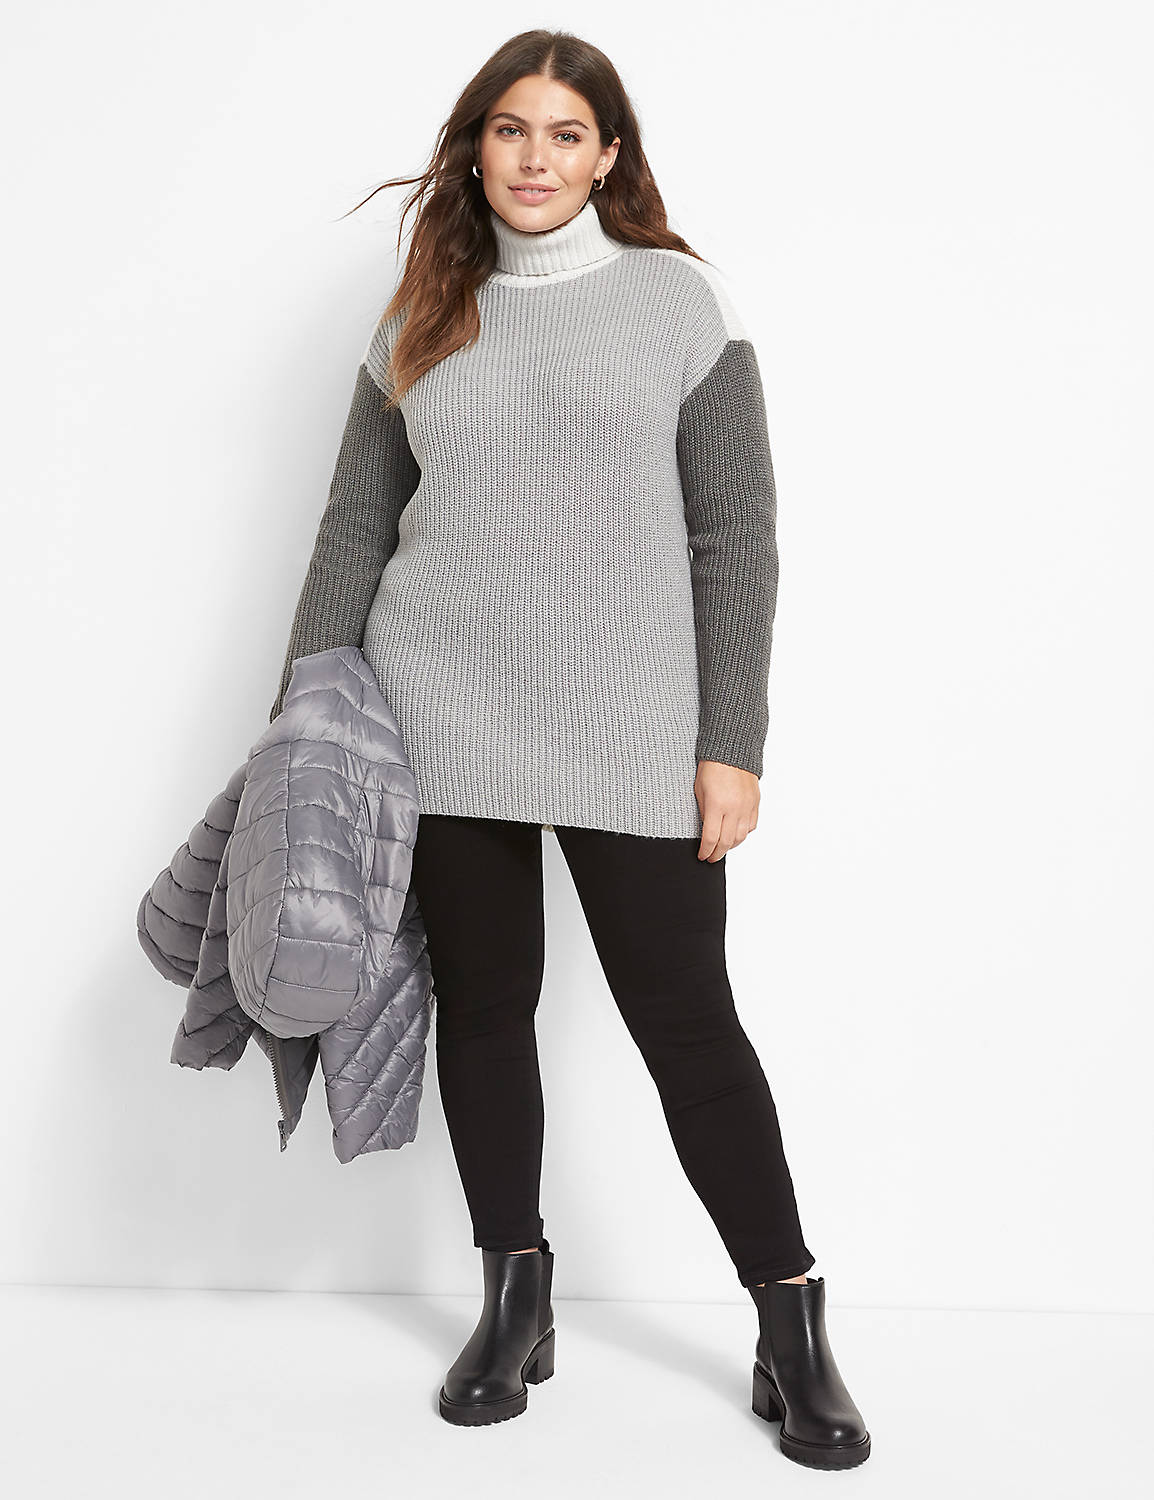 Long Sleeve Turtleneck Colorblock Pullover 1124657:BC04 Heather grey:10/12 Product Image 3